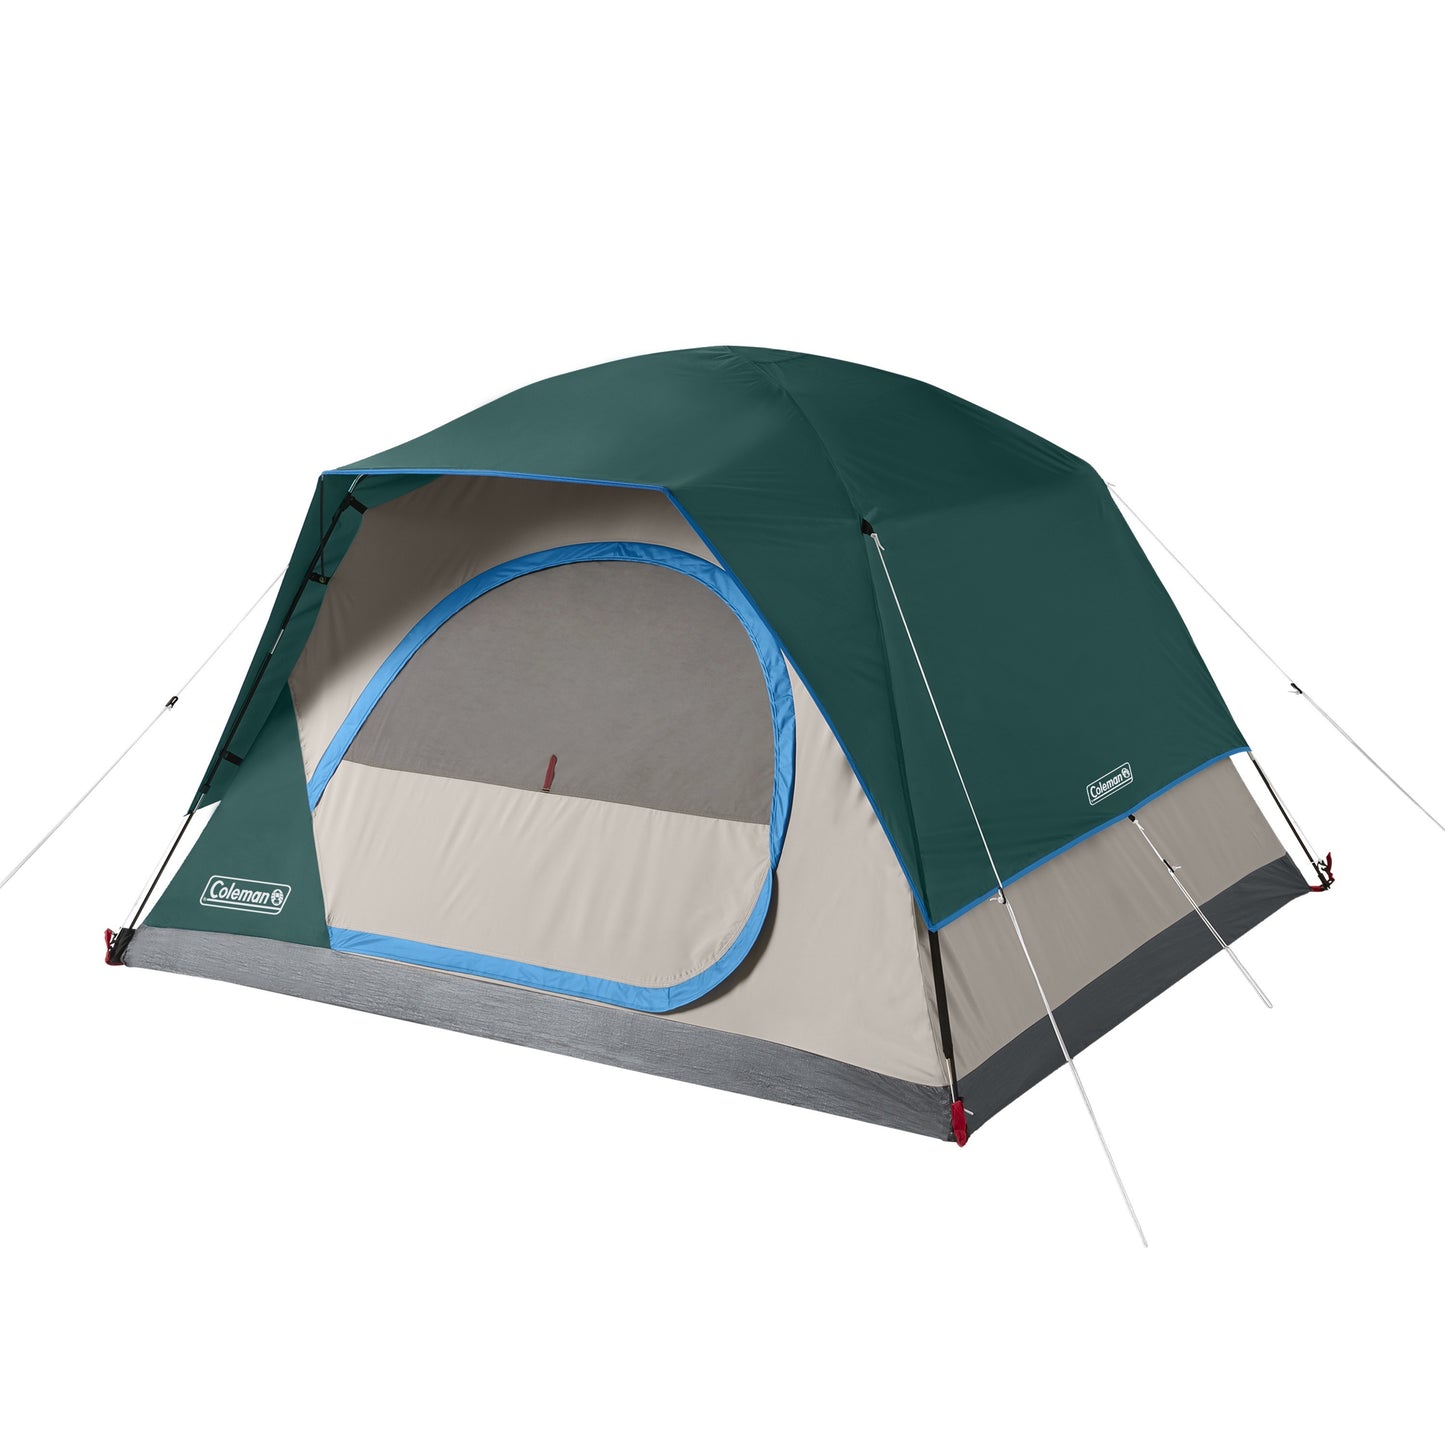 Coleman 6-Person Skydome Camping Tent, Evergreen